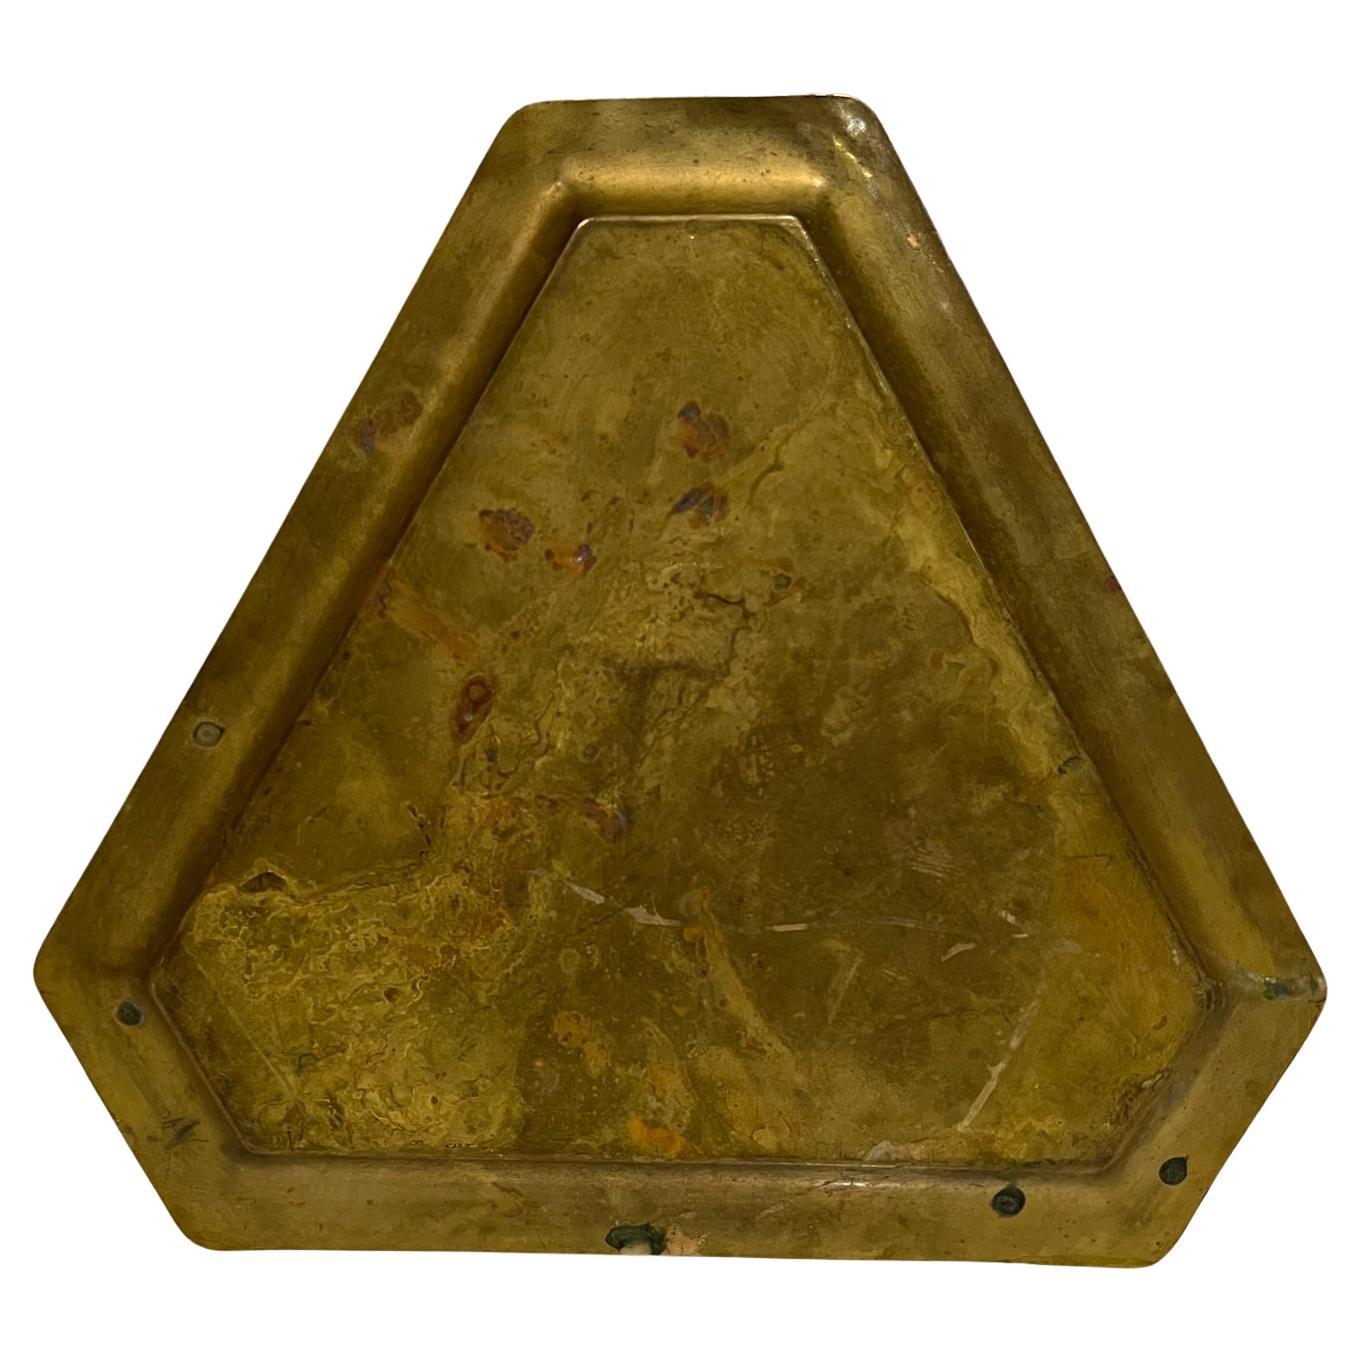 Vintage brass triangular tray Hammered Design
9.25 x 10.5 w x .38
Preowned original unrestored vintage condition. Wear is present.
Review images provided.
 